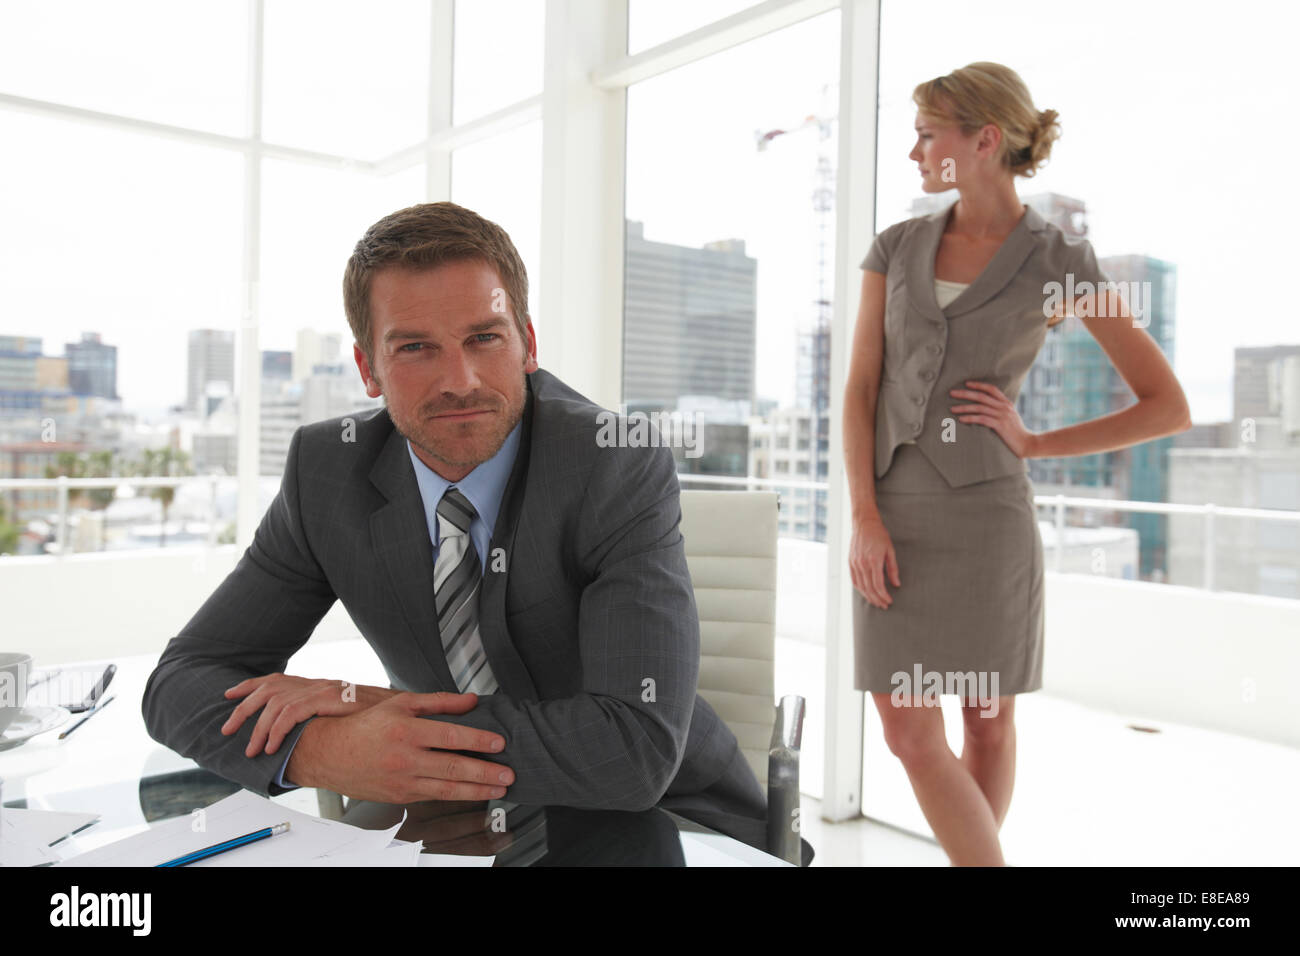 Young man with woman in the background Stock Photo